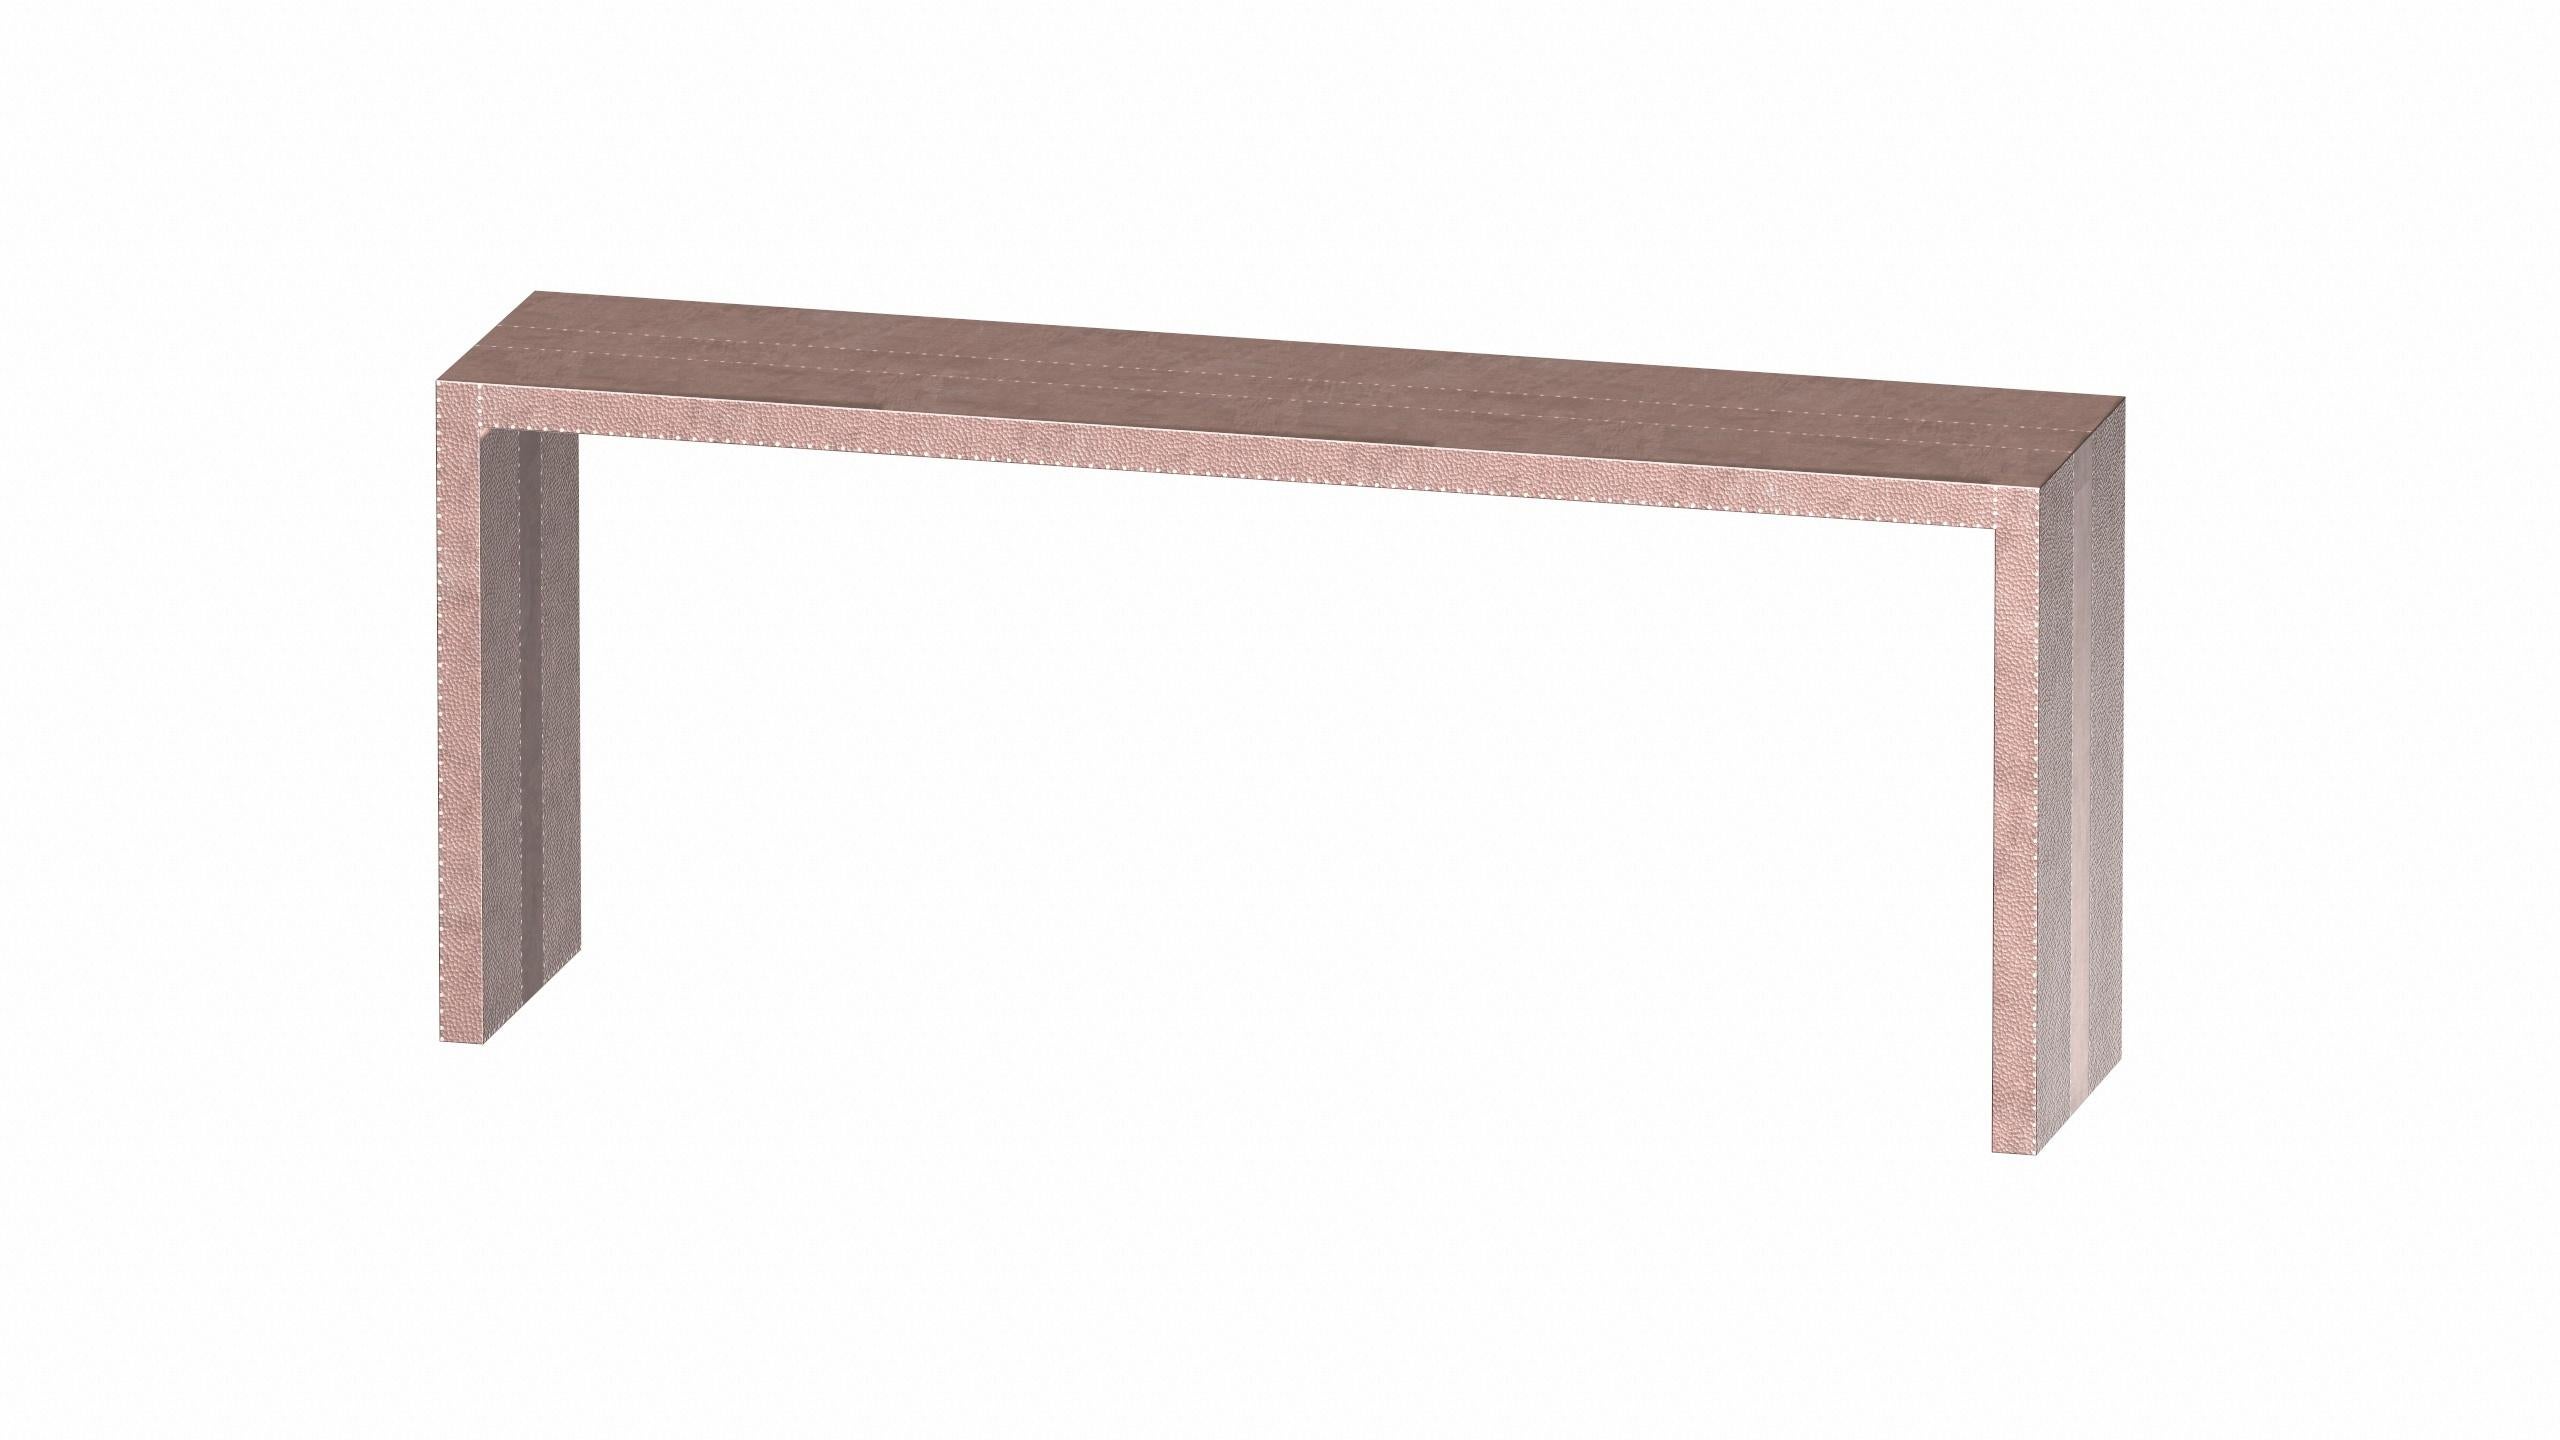 Art Deco Rectangular Console Tables Mid. Hammered Copper by Alison Spear For Sale 3